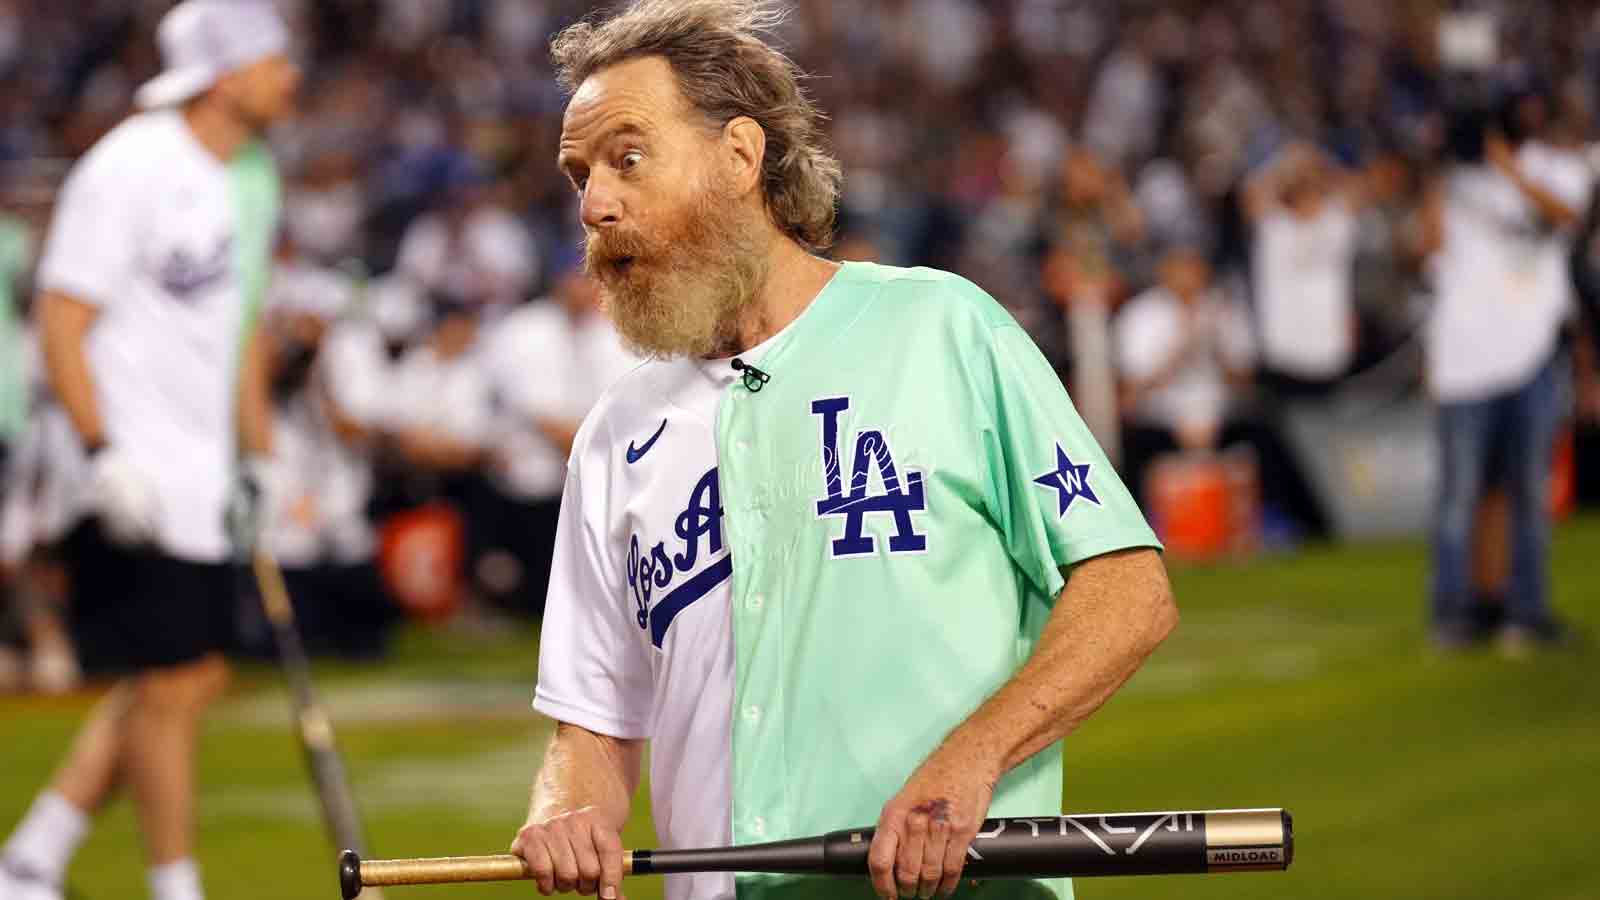 Ouch! Actor Cranston hit by liner at All-Star celeb softball – WATE 6 On  Your Side